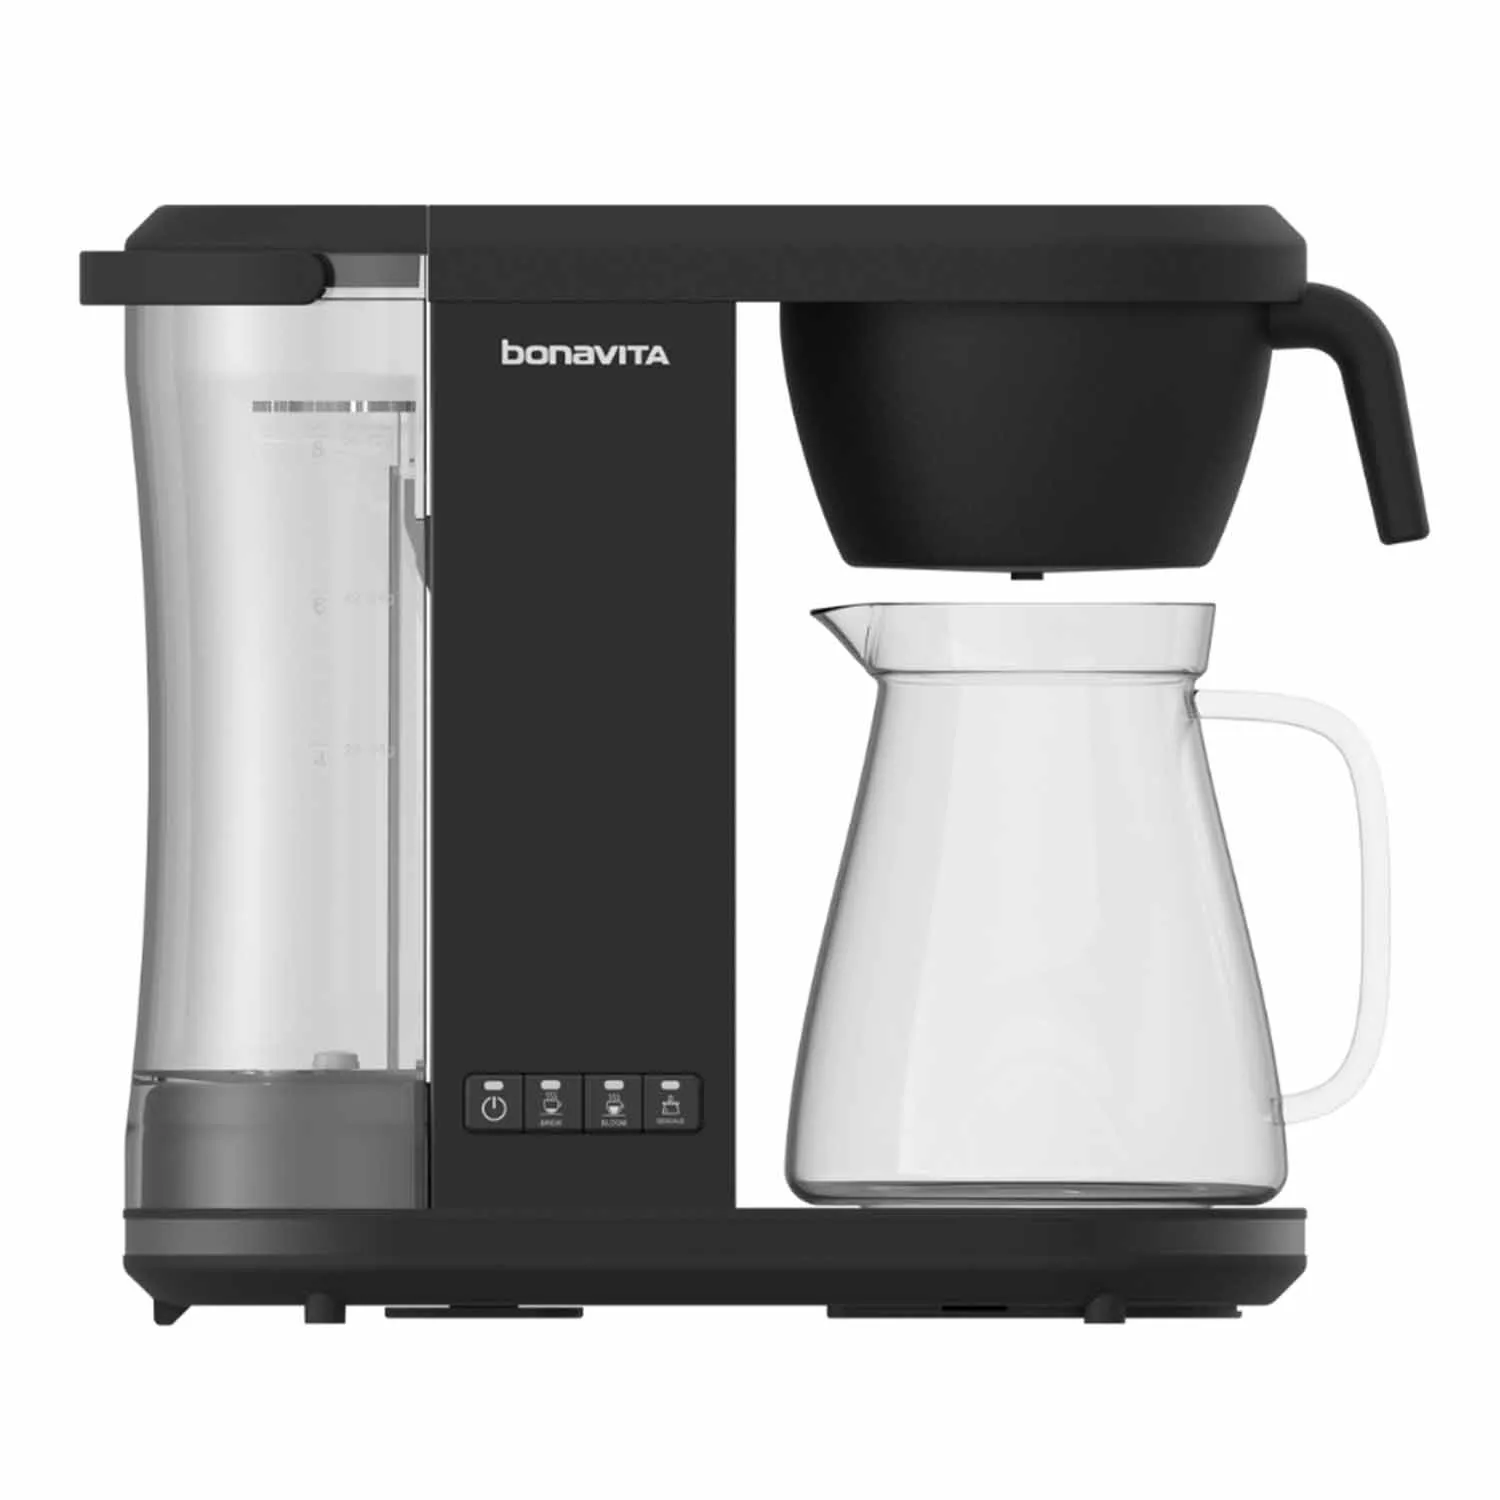 New SCA Certified Home Brewer: Bonavita Enthusiast with Glass Carafe —  Specialty Coffee Association